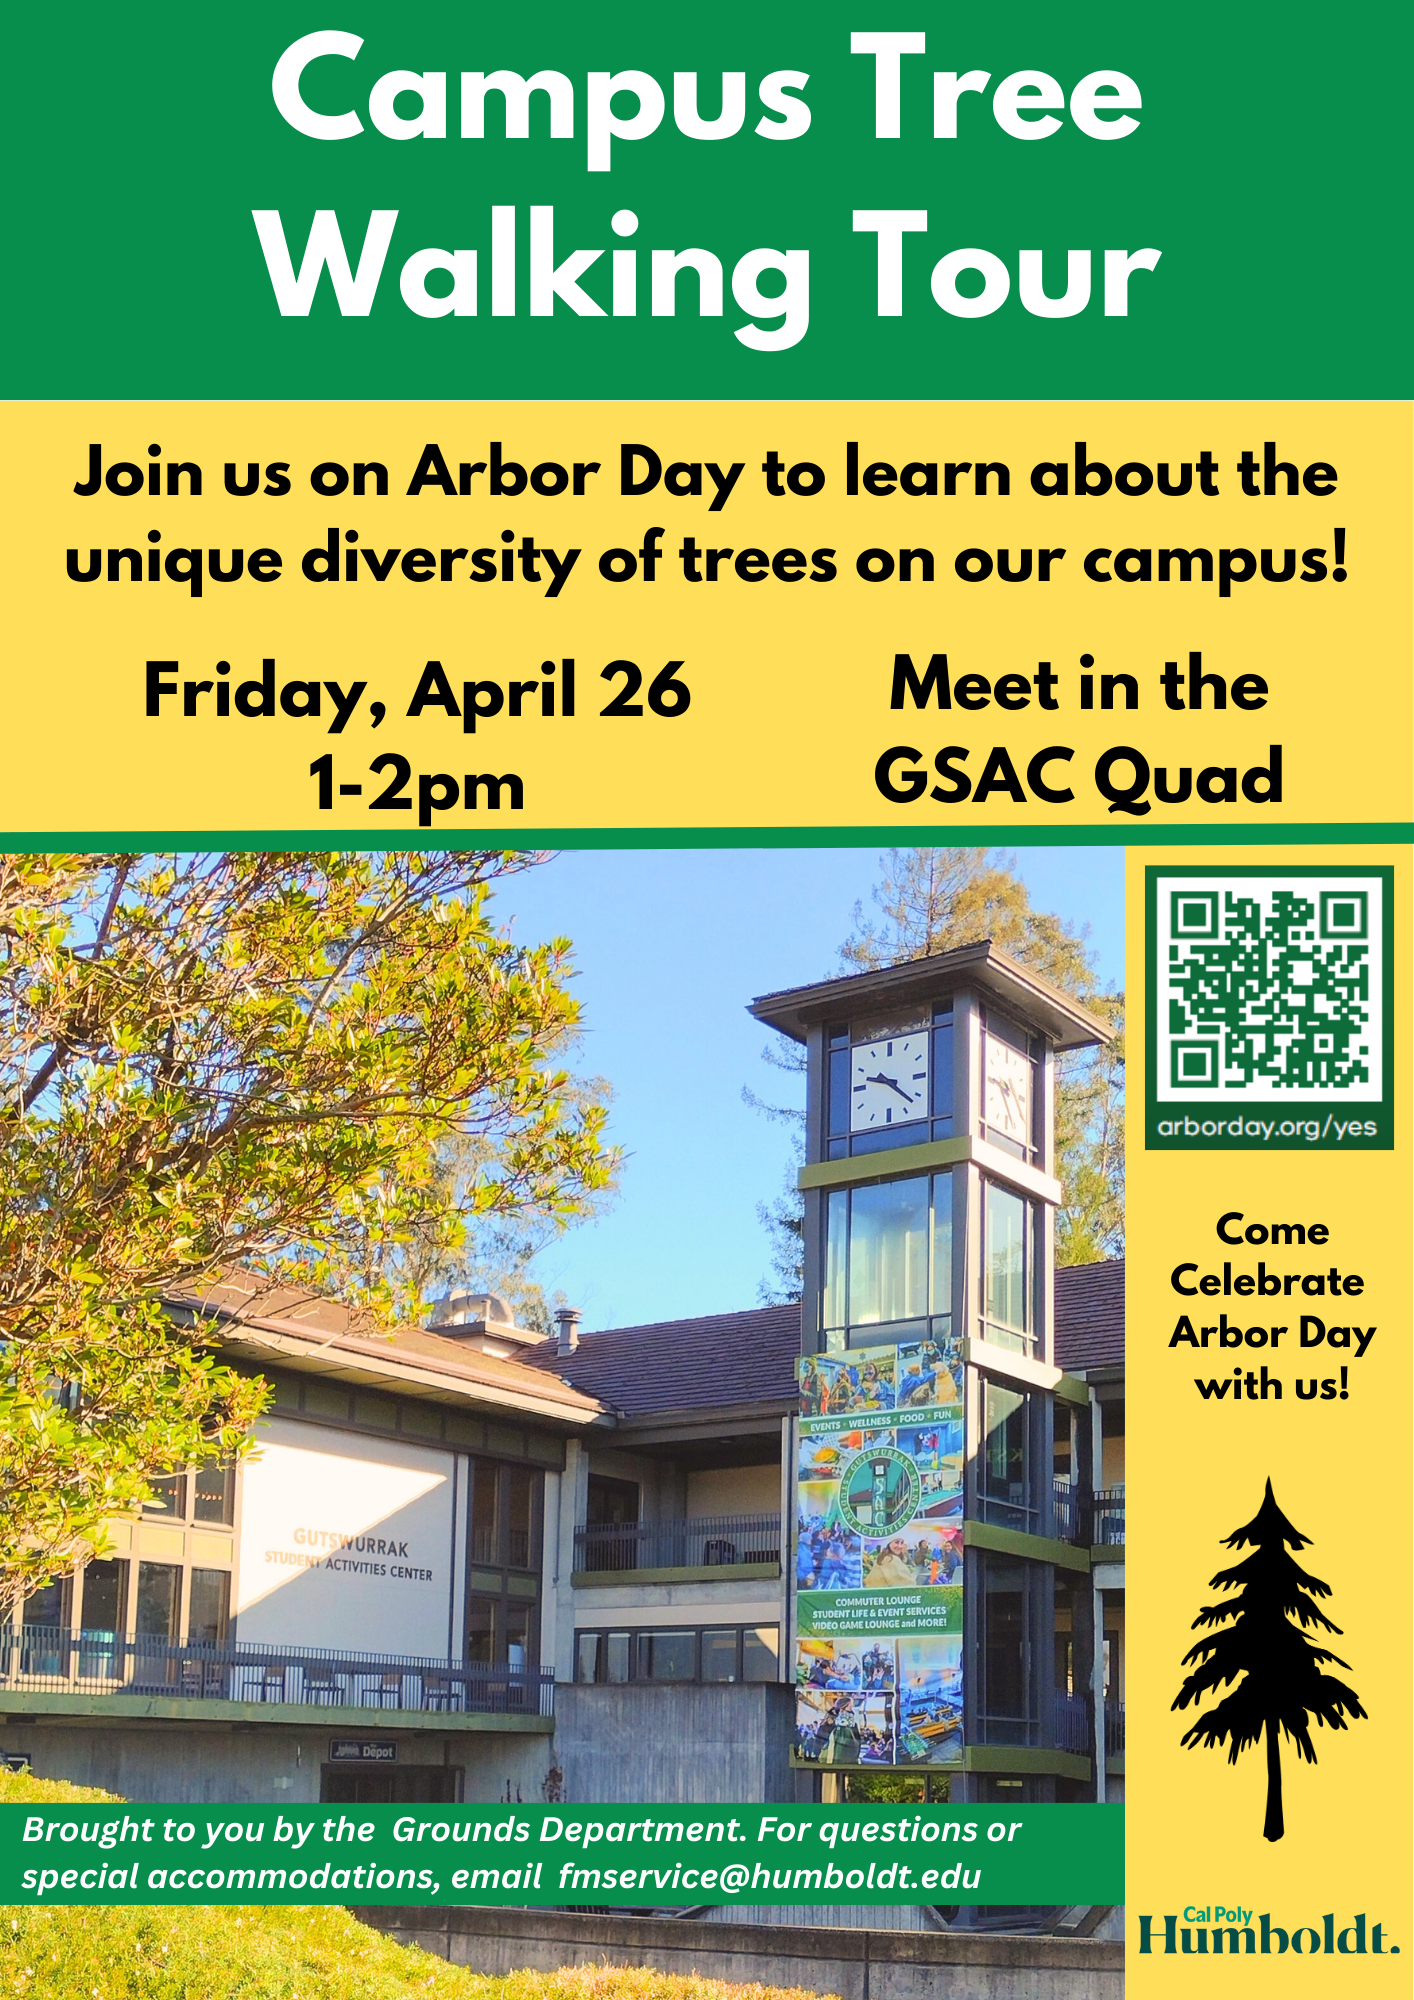 Flier for the Campus Tree Walking Tour, Friday April 26, 1-2pm. Meet in the GSAC Quad. Join us on Arbor Day to learn about the unique diversity of trees on our campus!